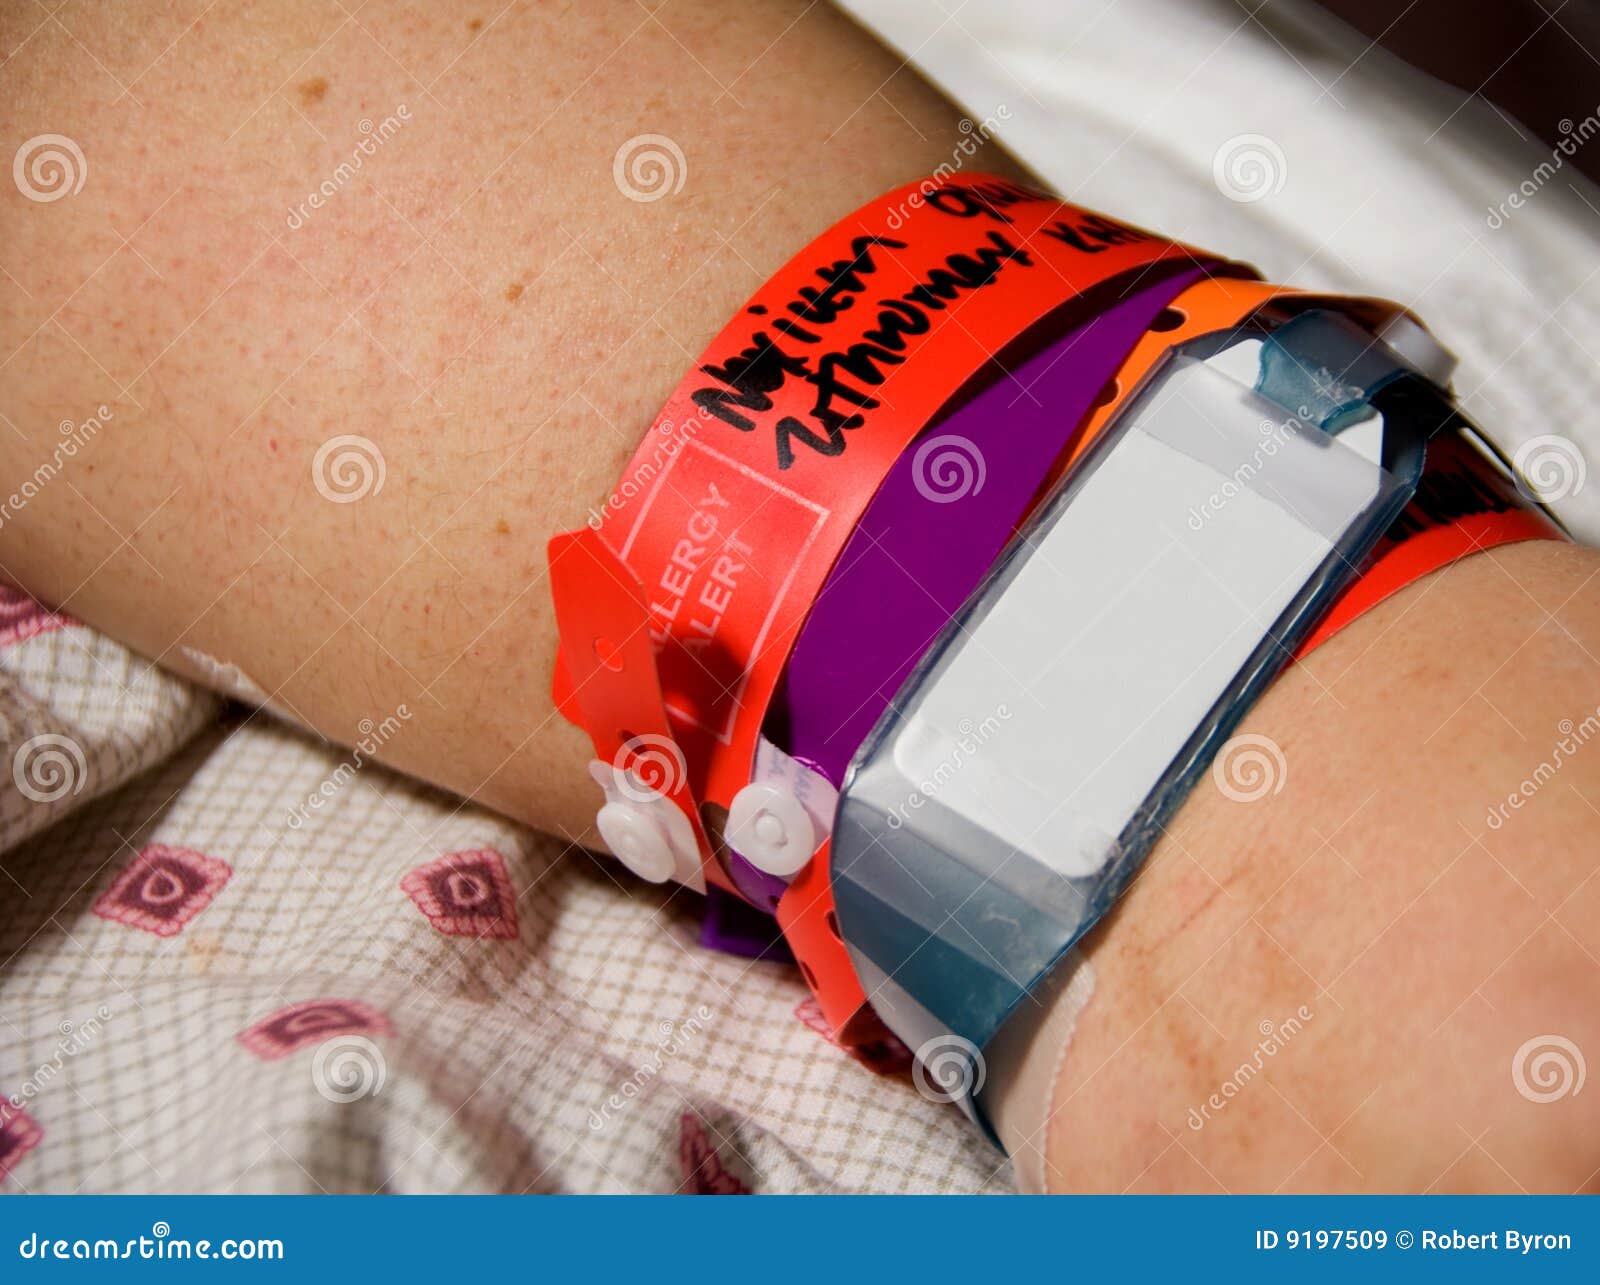 How One Hospital Improved Patient Safety with Wristbands EndurID